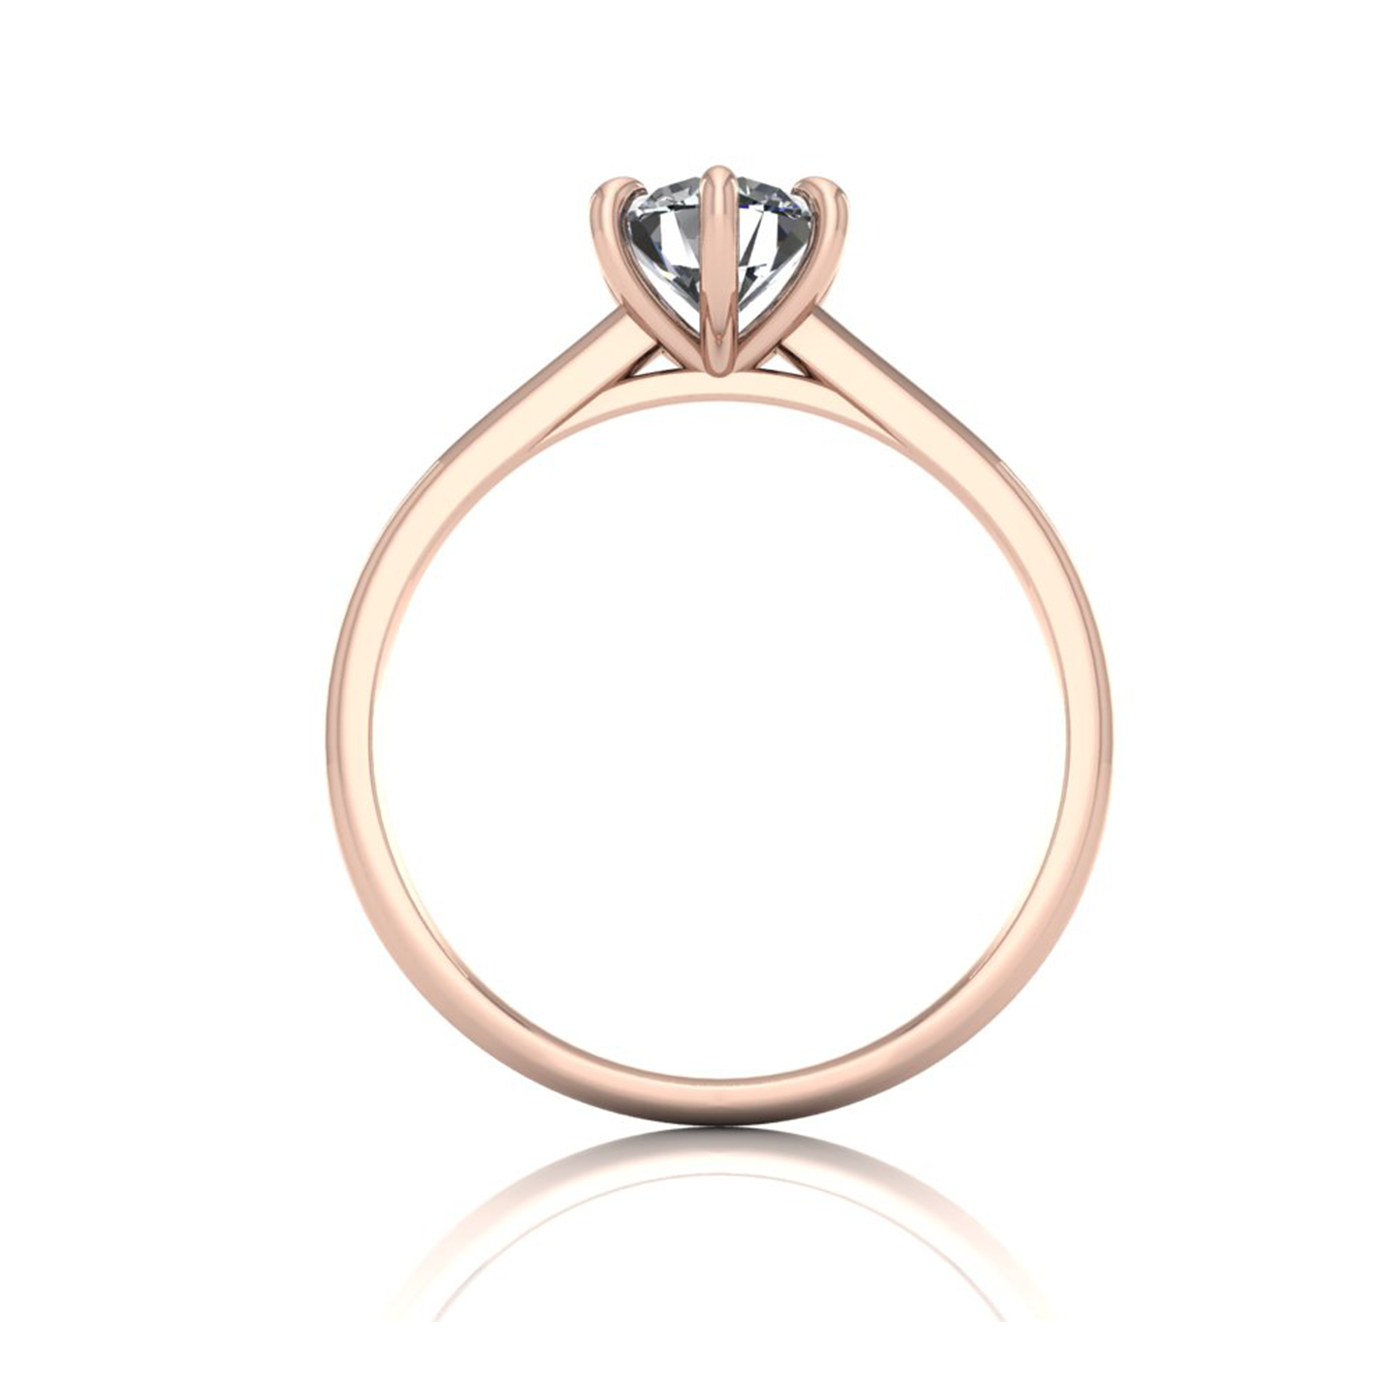 18k rose gold 0,80 ct 6 prongs solitaire round cut diamond engagement ring with whisper thin band